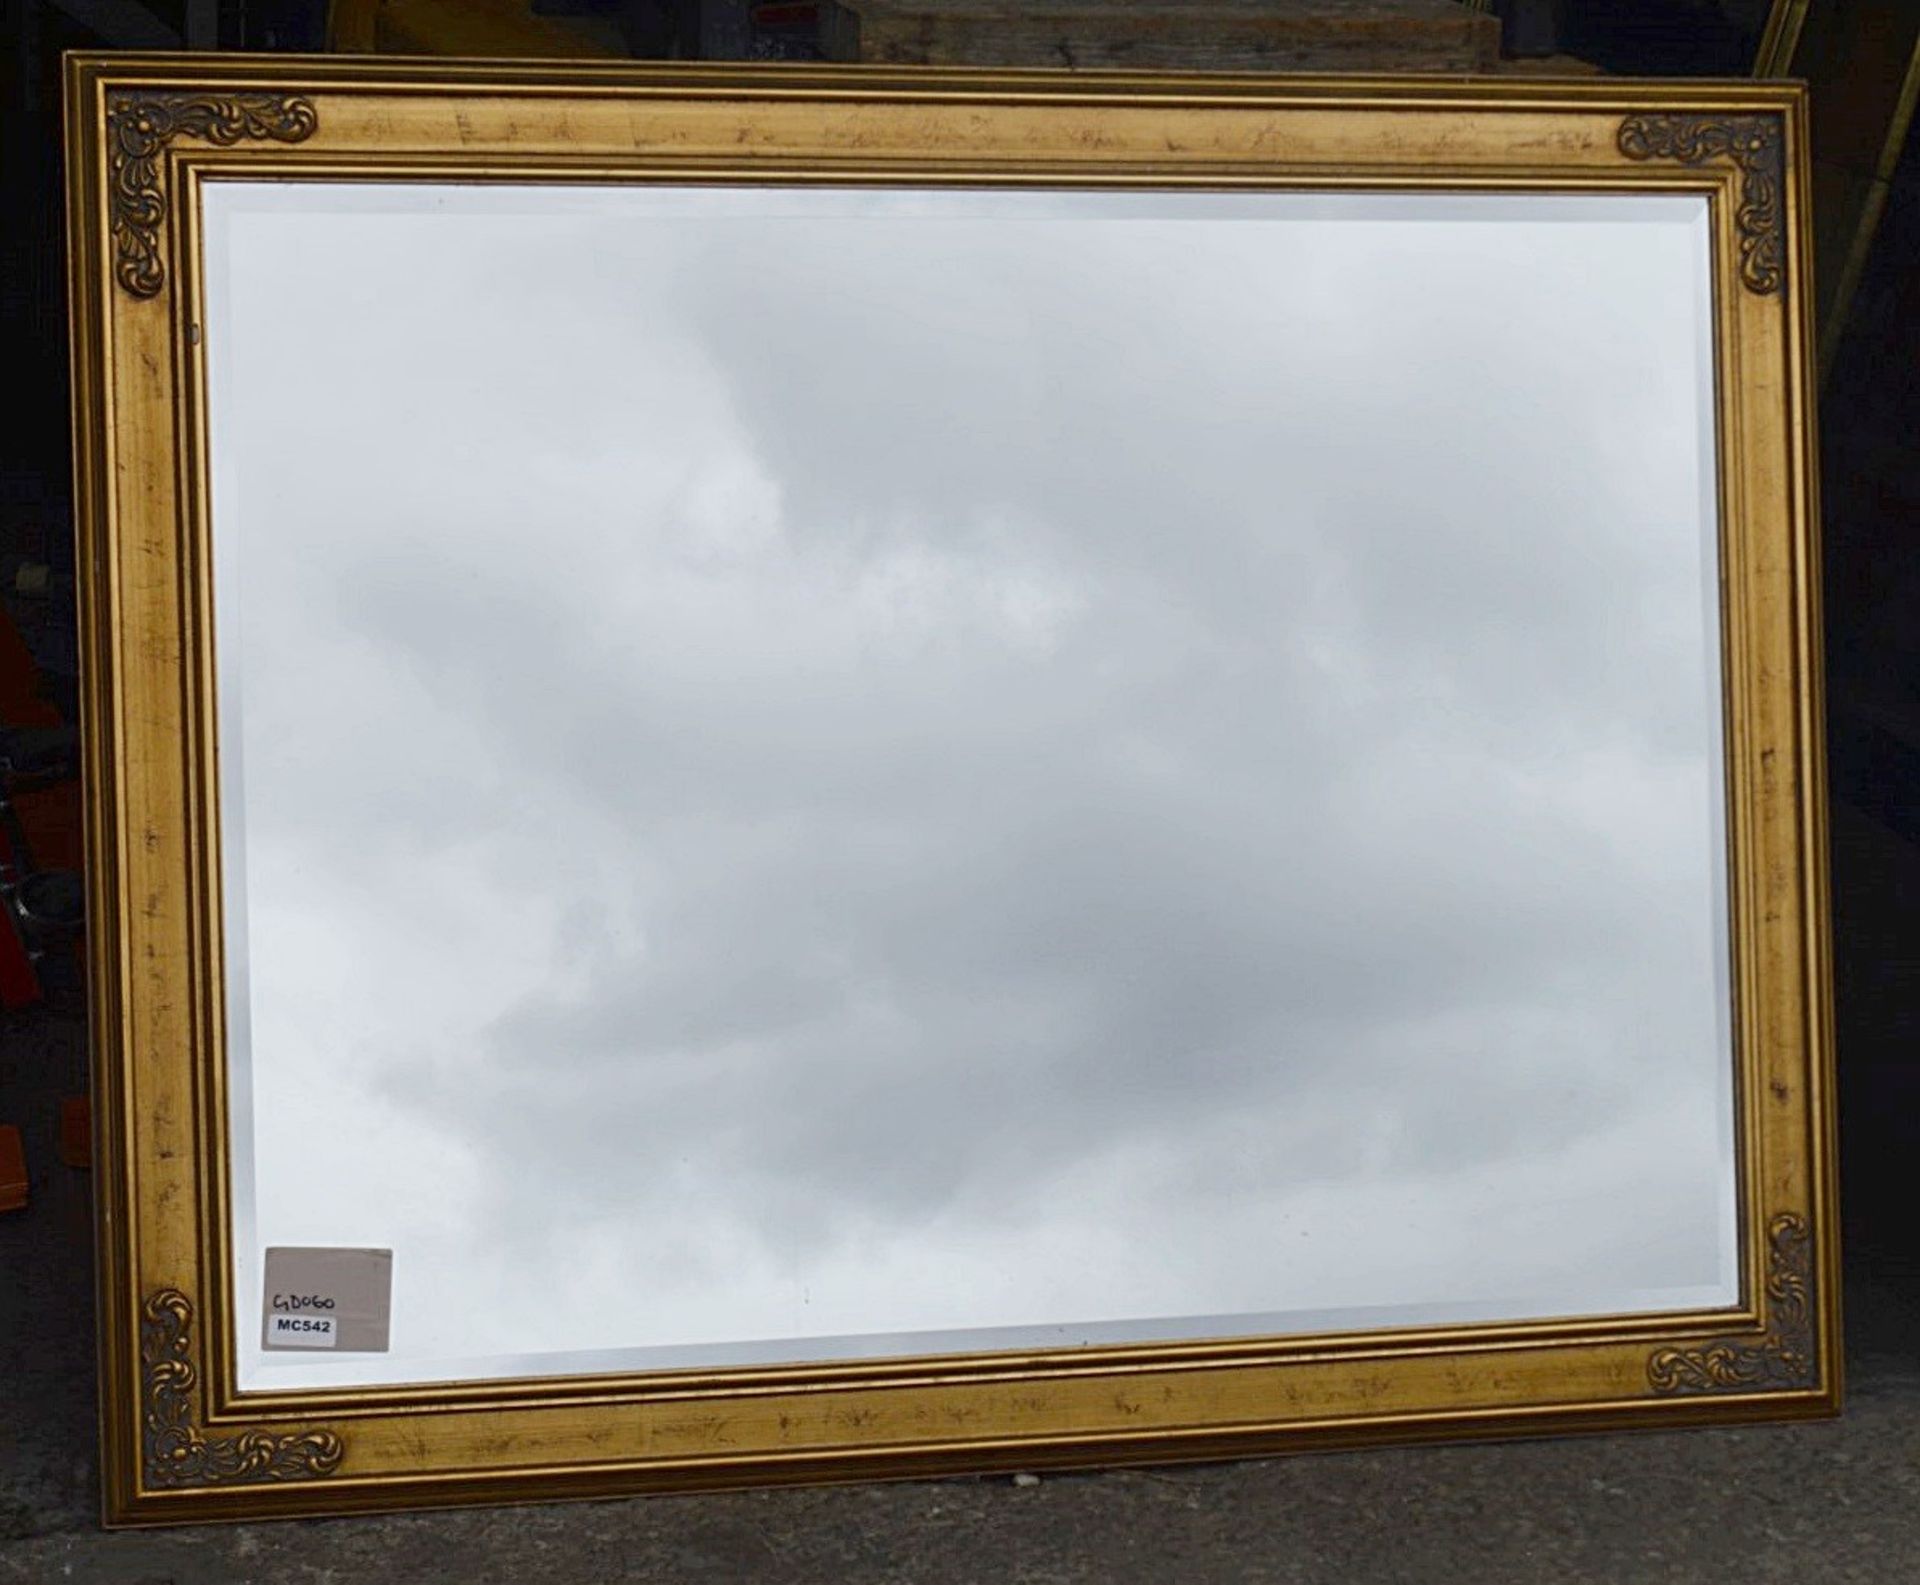 1 x Large Statement Mirror In A Gold Frame With An Aged Finish - Dimensions: 141 x 110cm